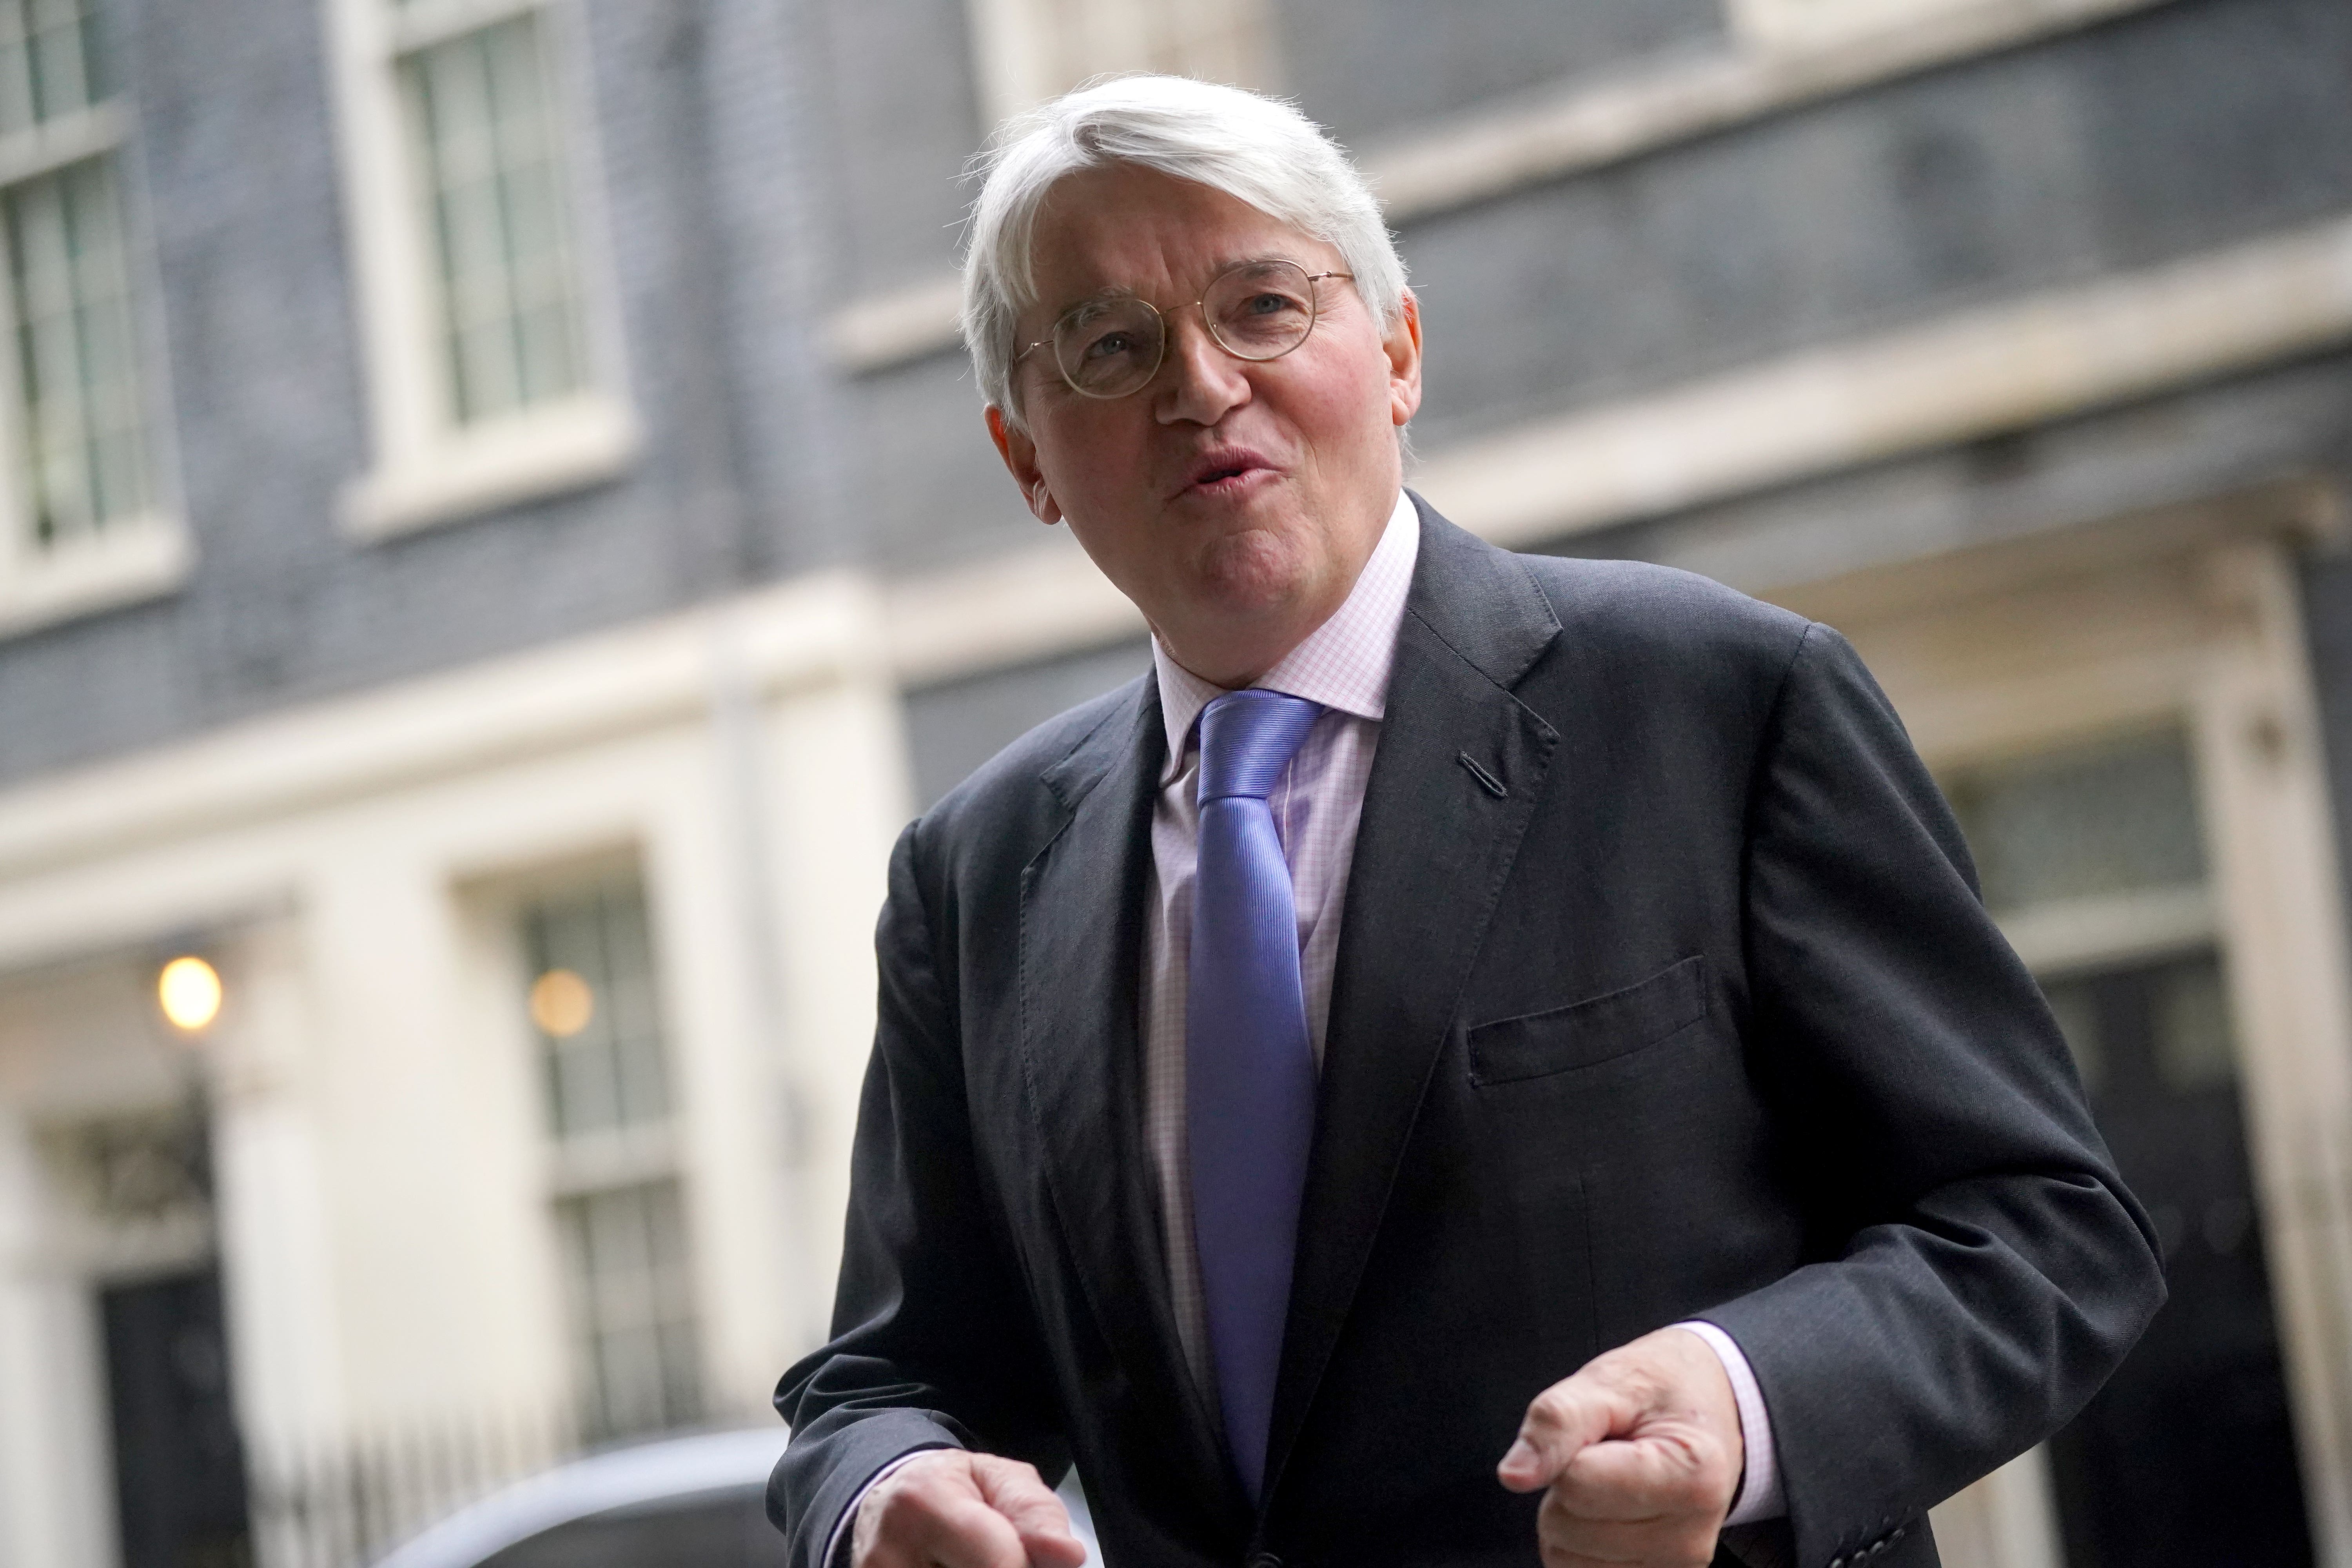 Andrew Mitchell voiced concerns about the current situation in Gaza